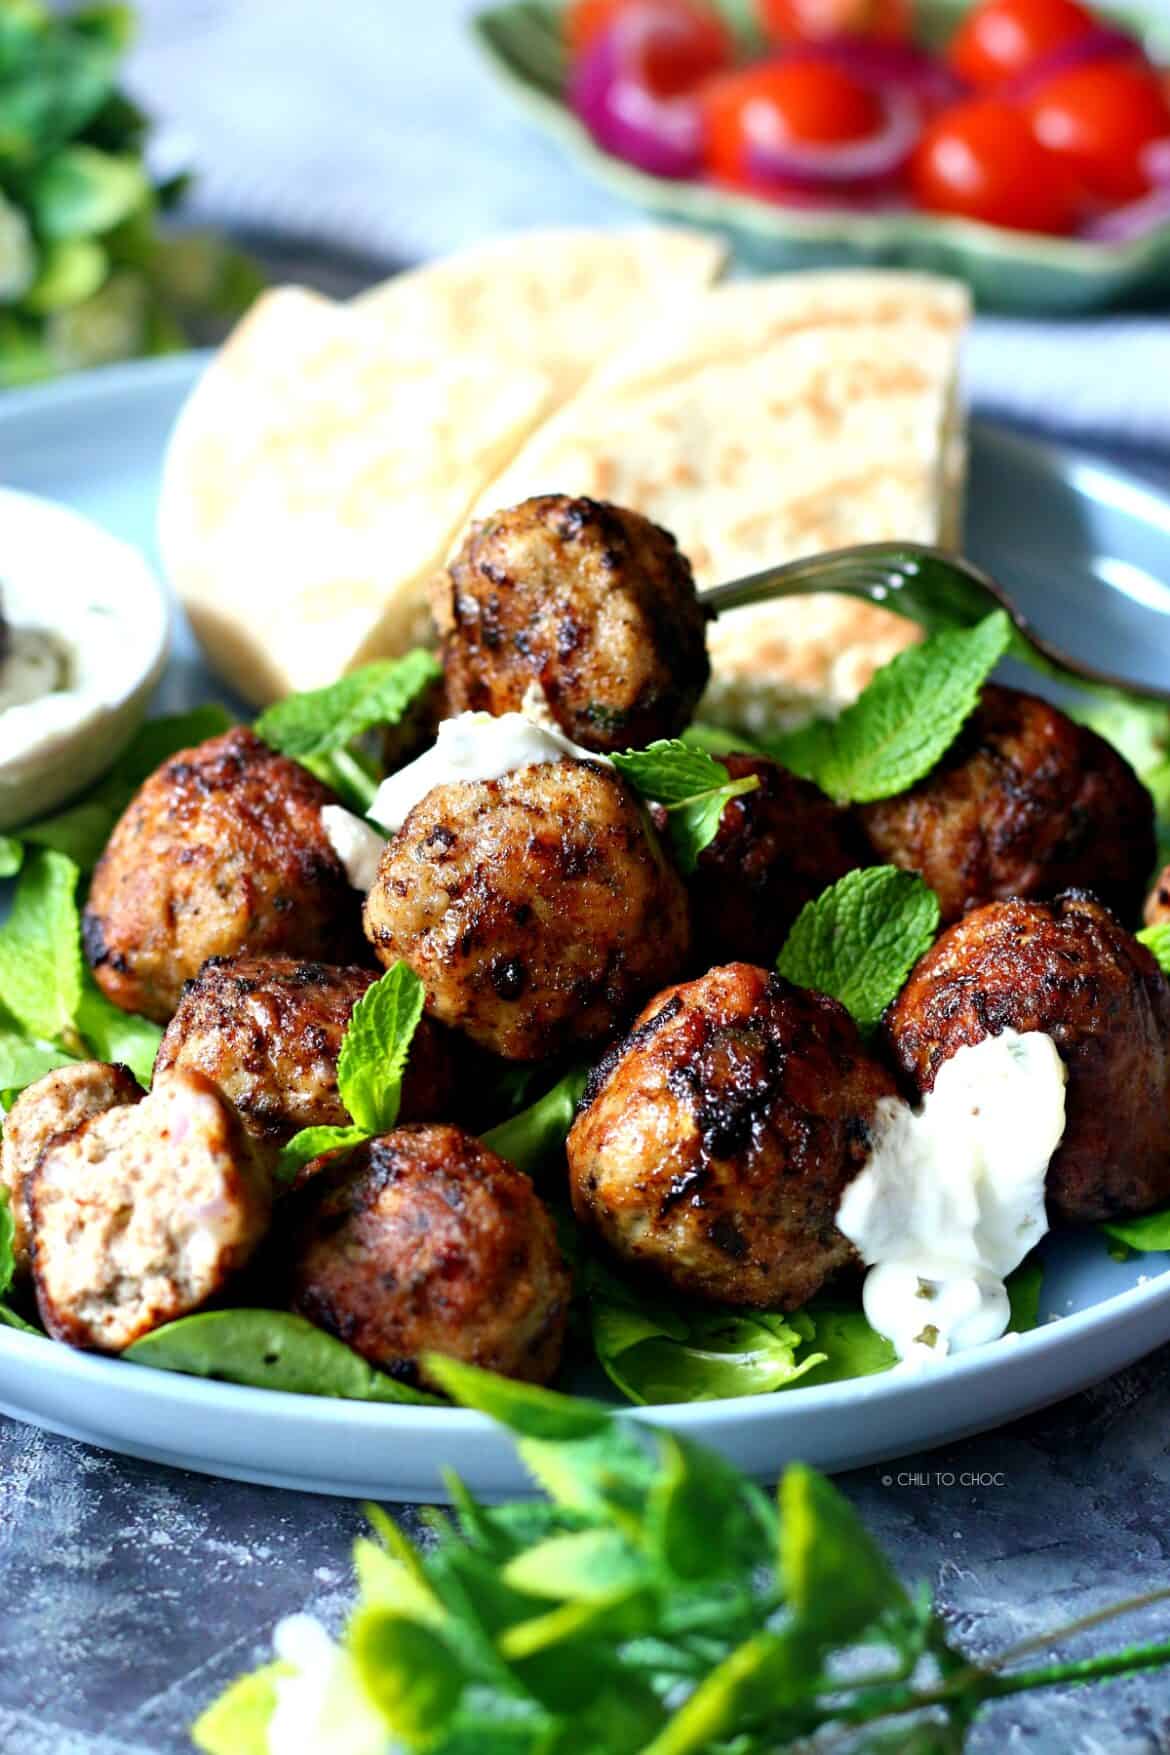 Easy Greek Meatballs (Keftedes) - Chili to Choc